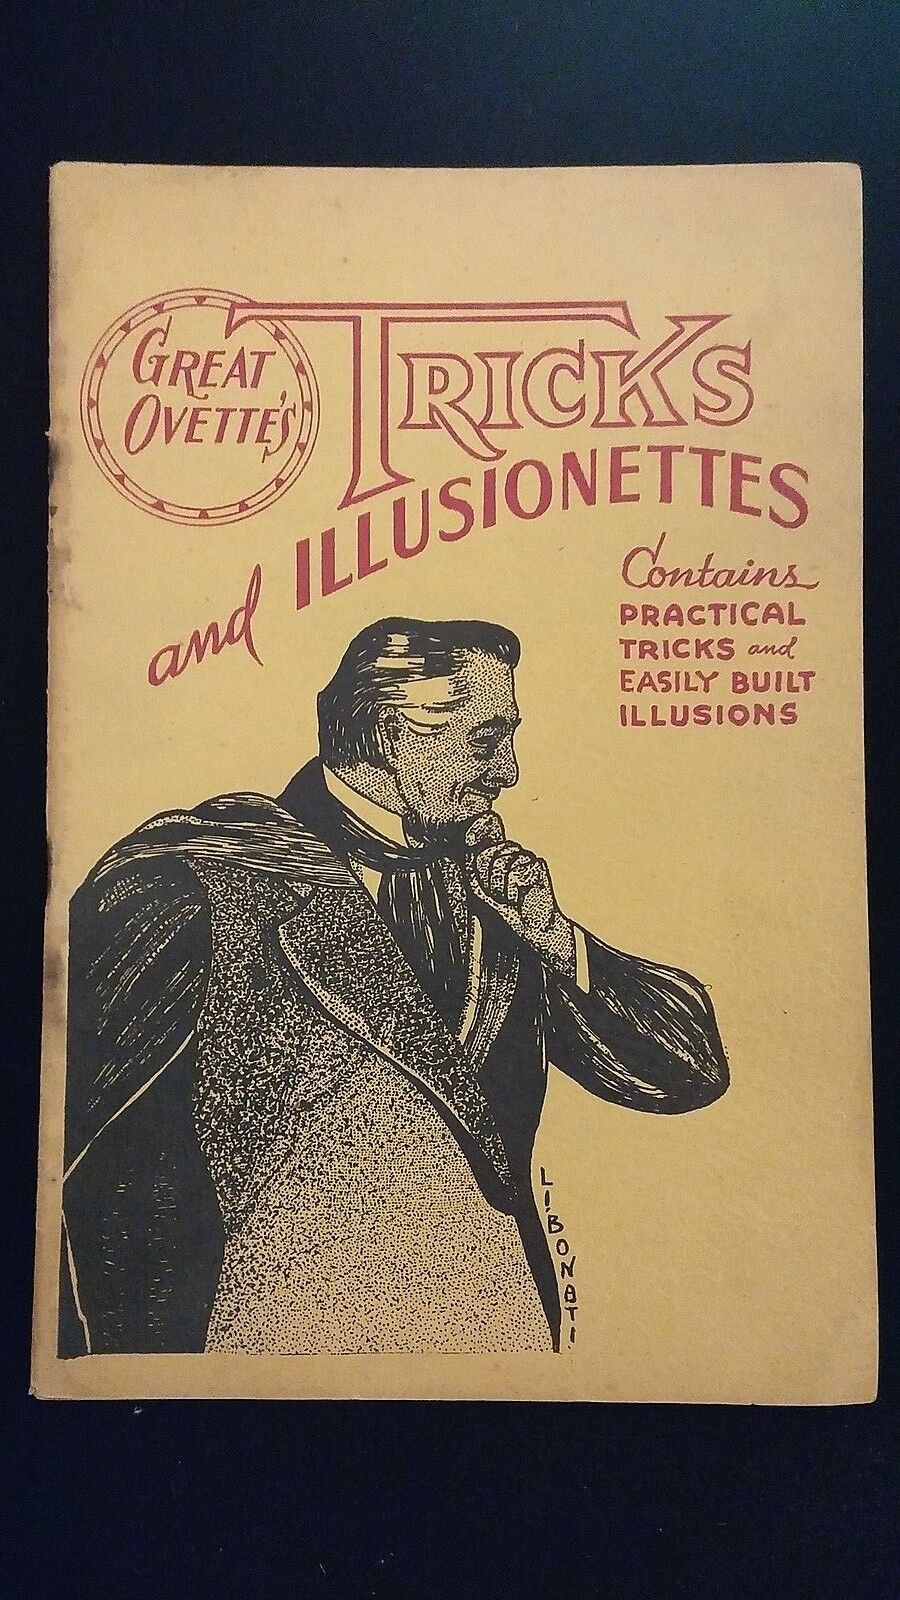 Vintage Great Ovette TRICKS AND ILLUSIONETTES Practical Tricks Easily Built 1944